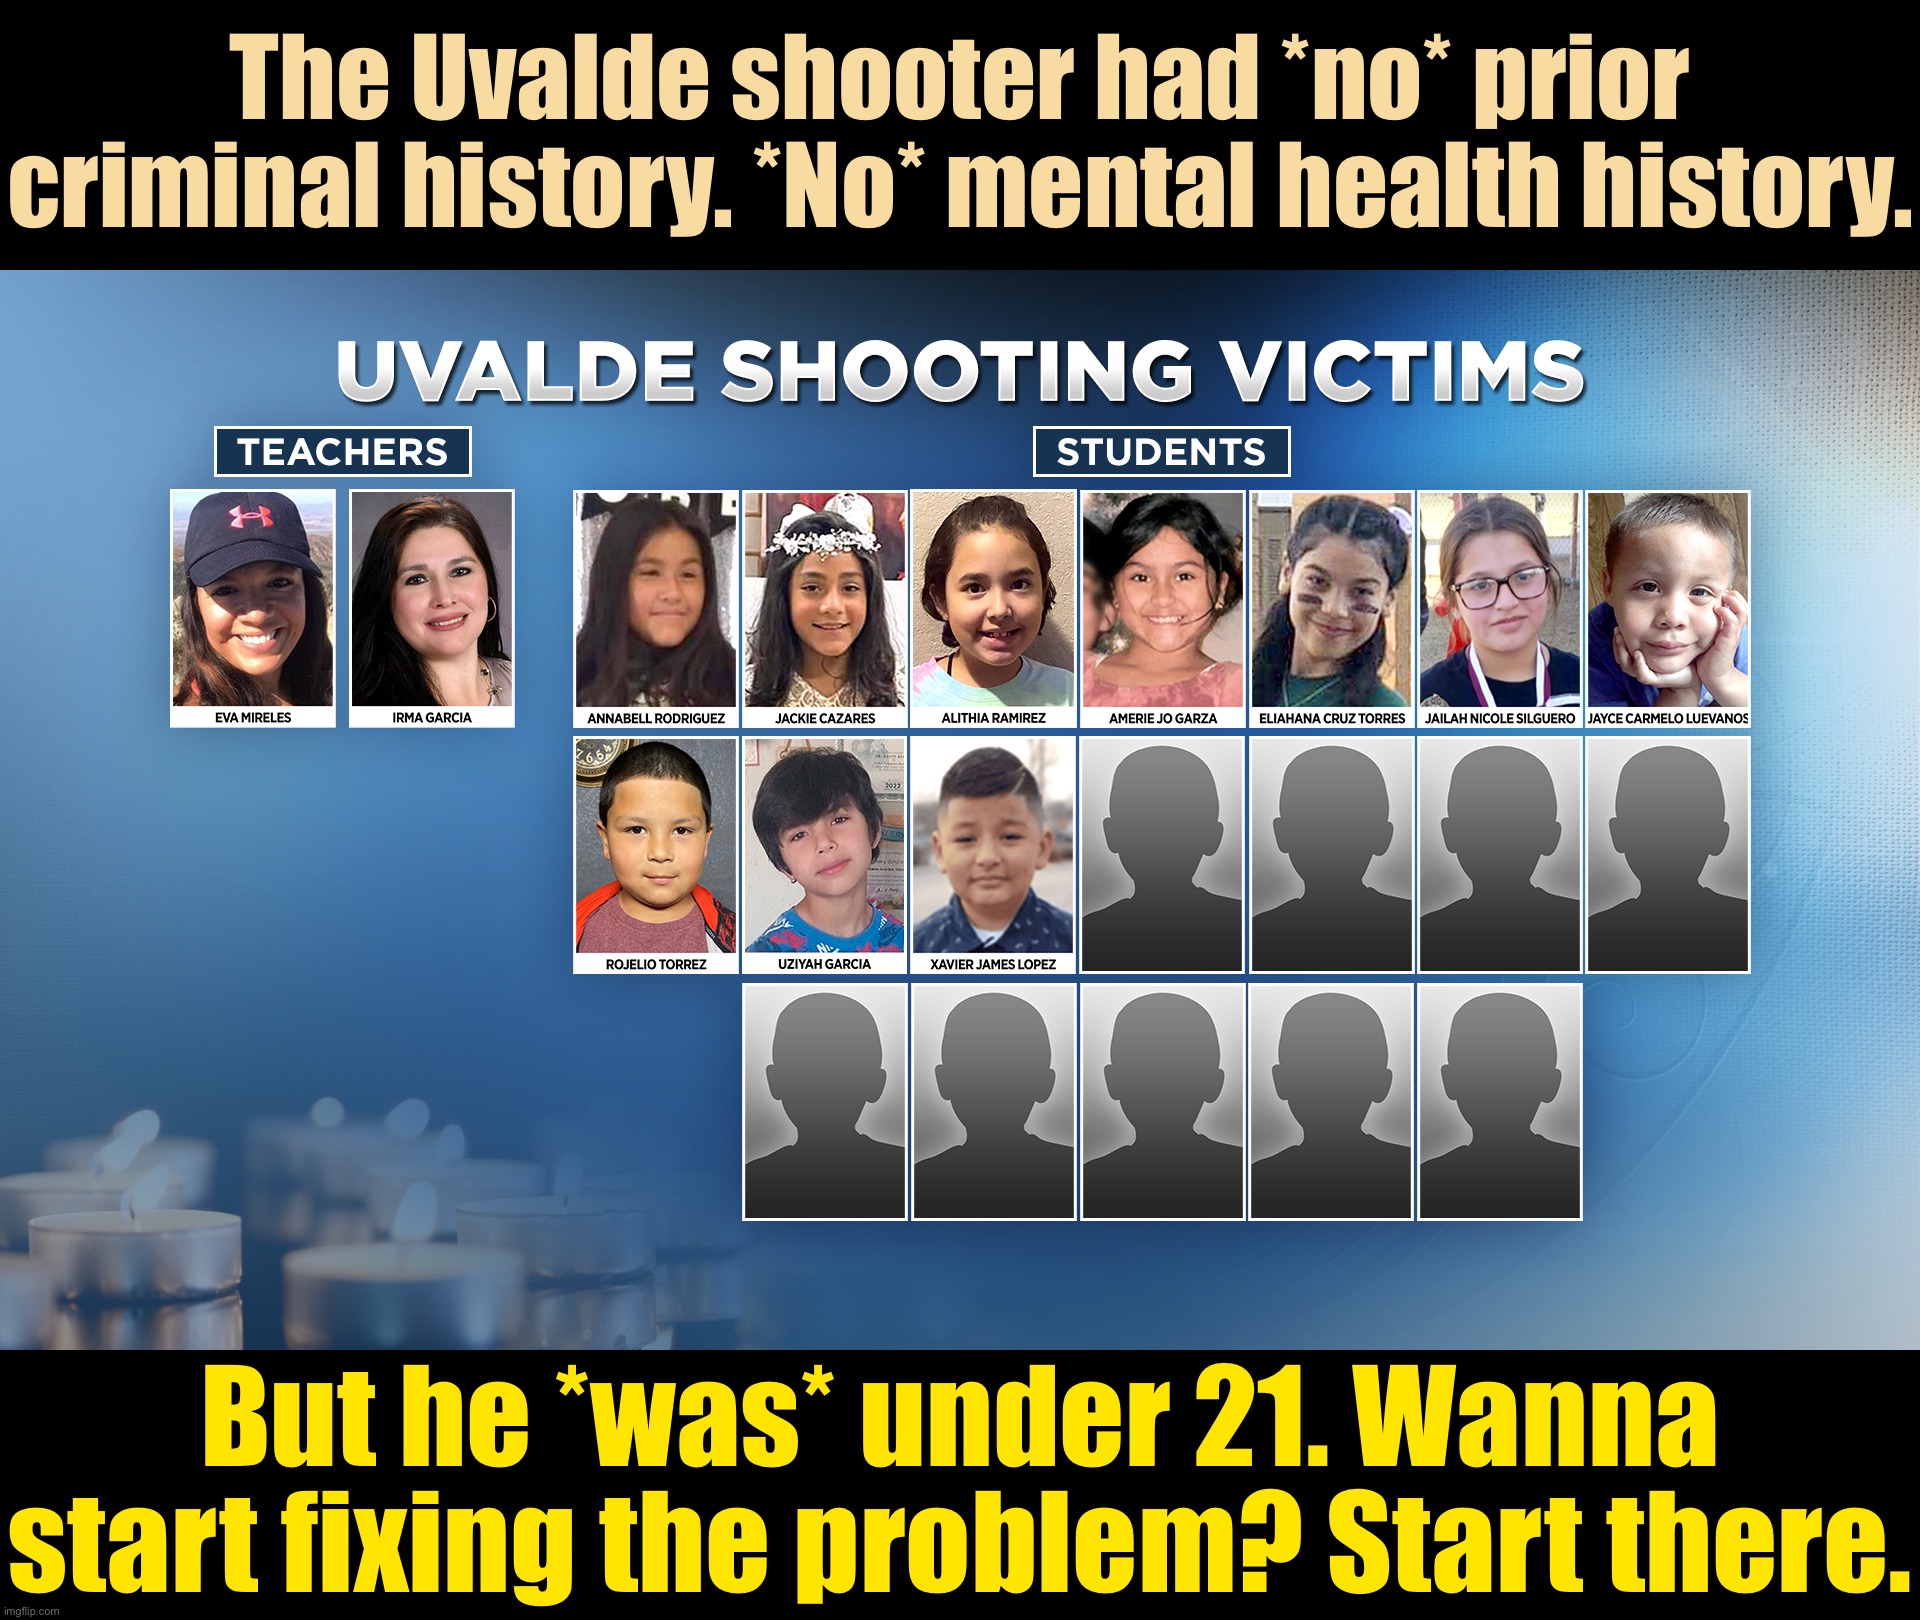 Naturally, very young shooters are the most likely to have had no prior contact with the authorities. So, ban gun sales under 21 | The Uvalde shooter had *no* prior criminal history. *No* mental health history. But he *was* under 21. Wanna start fixing the problem? Start there. | image tagged in uvalde shooting victims,guns,mass shootings,mass shooting,school shooting,school shootings | made w/ Imgflip meme maker